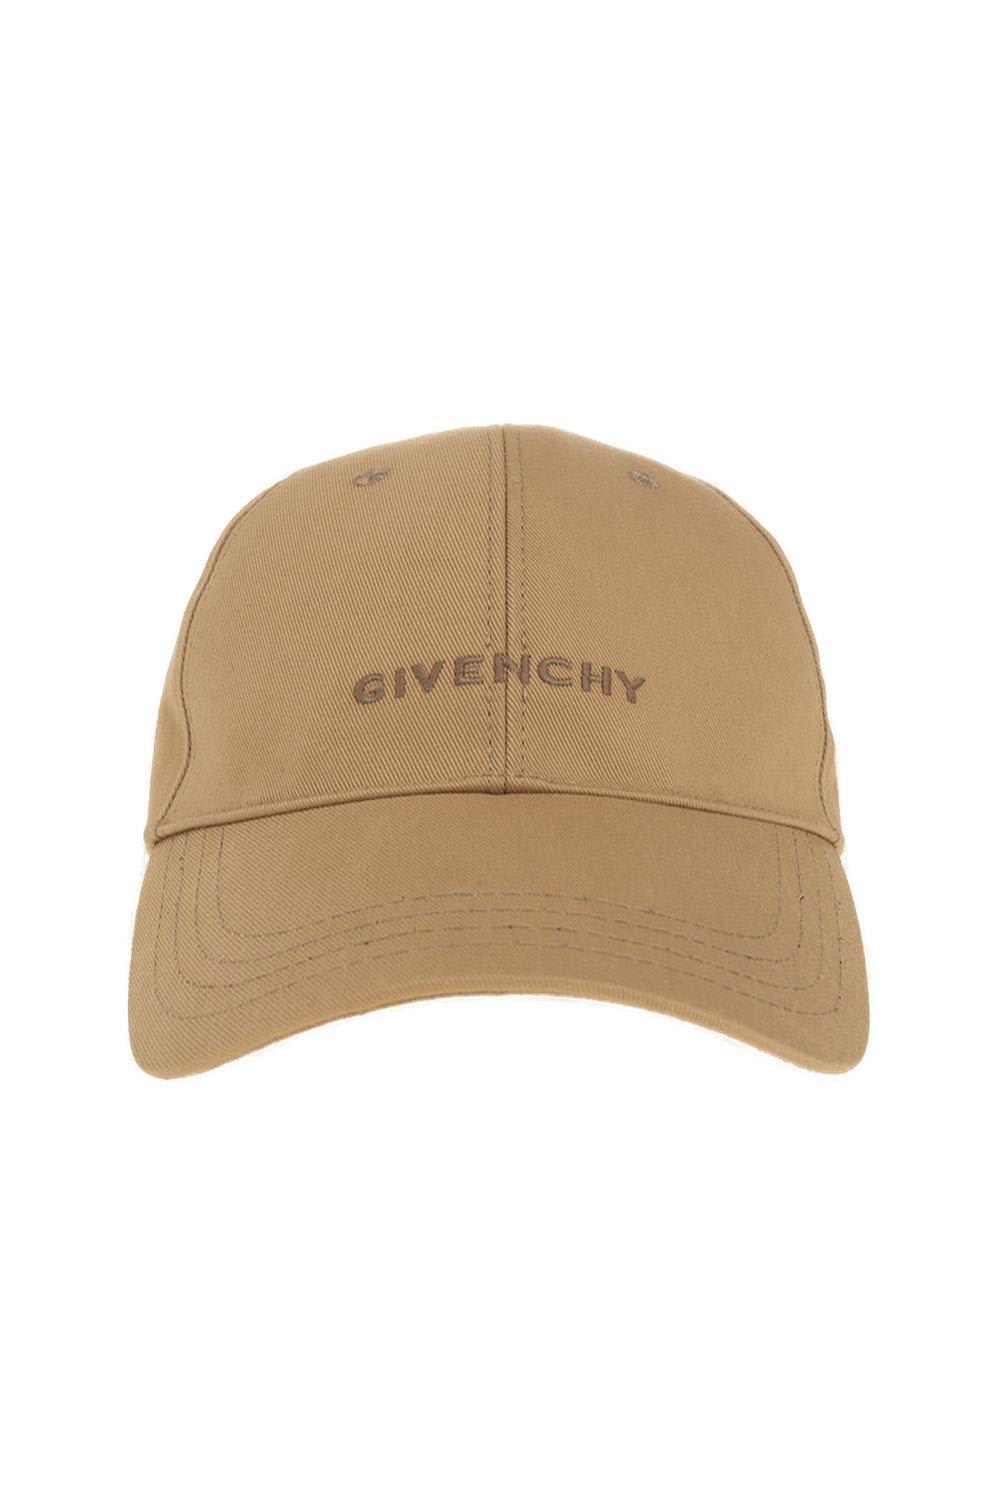 GIVENCHY LOGO-EMBROIDERED CURVED PEAK CAP